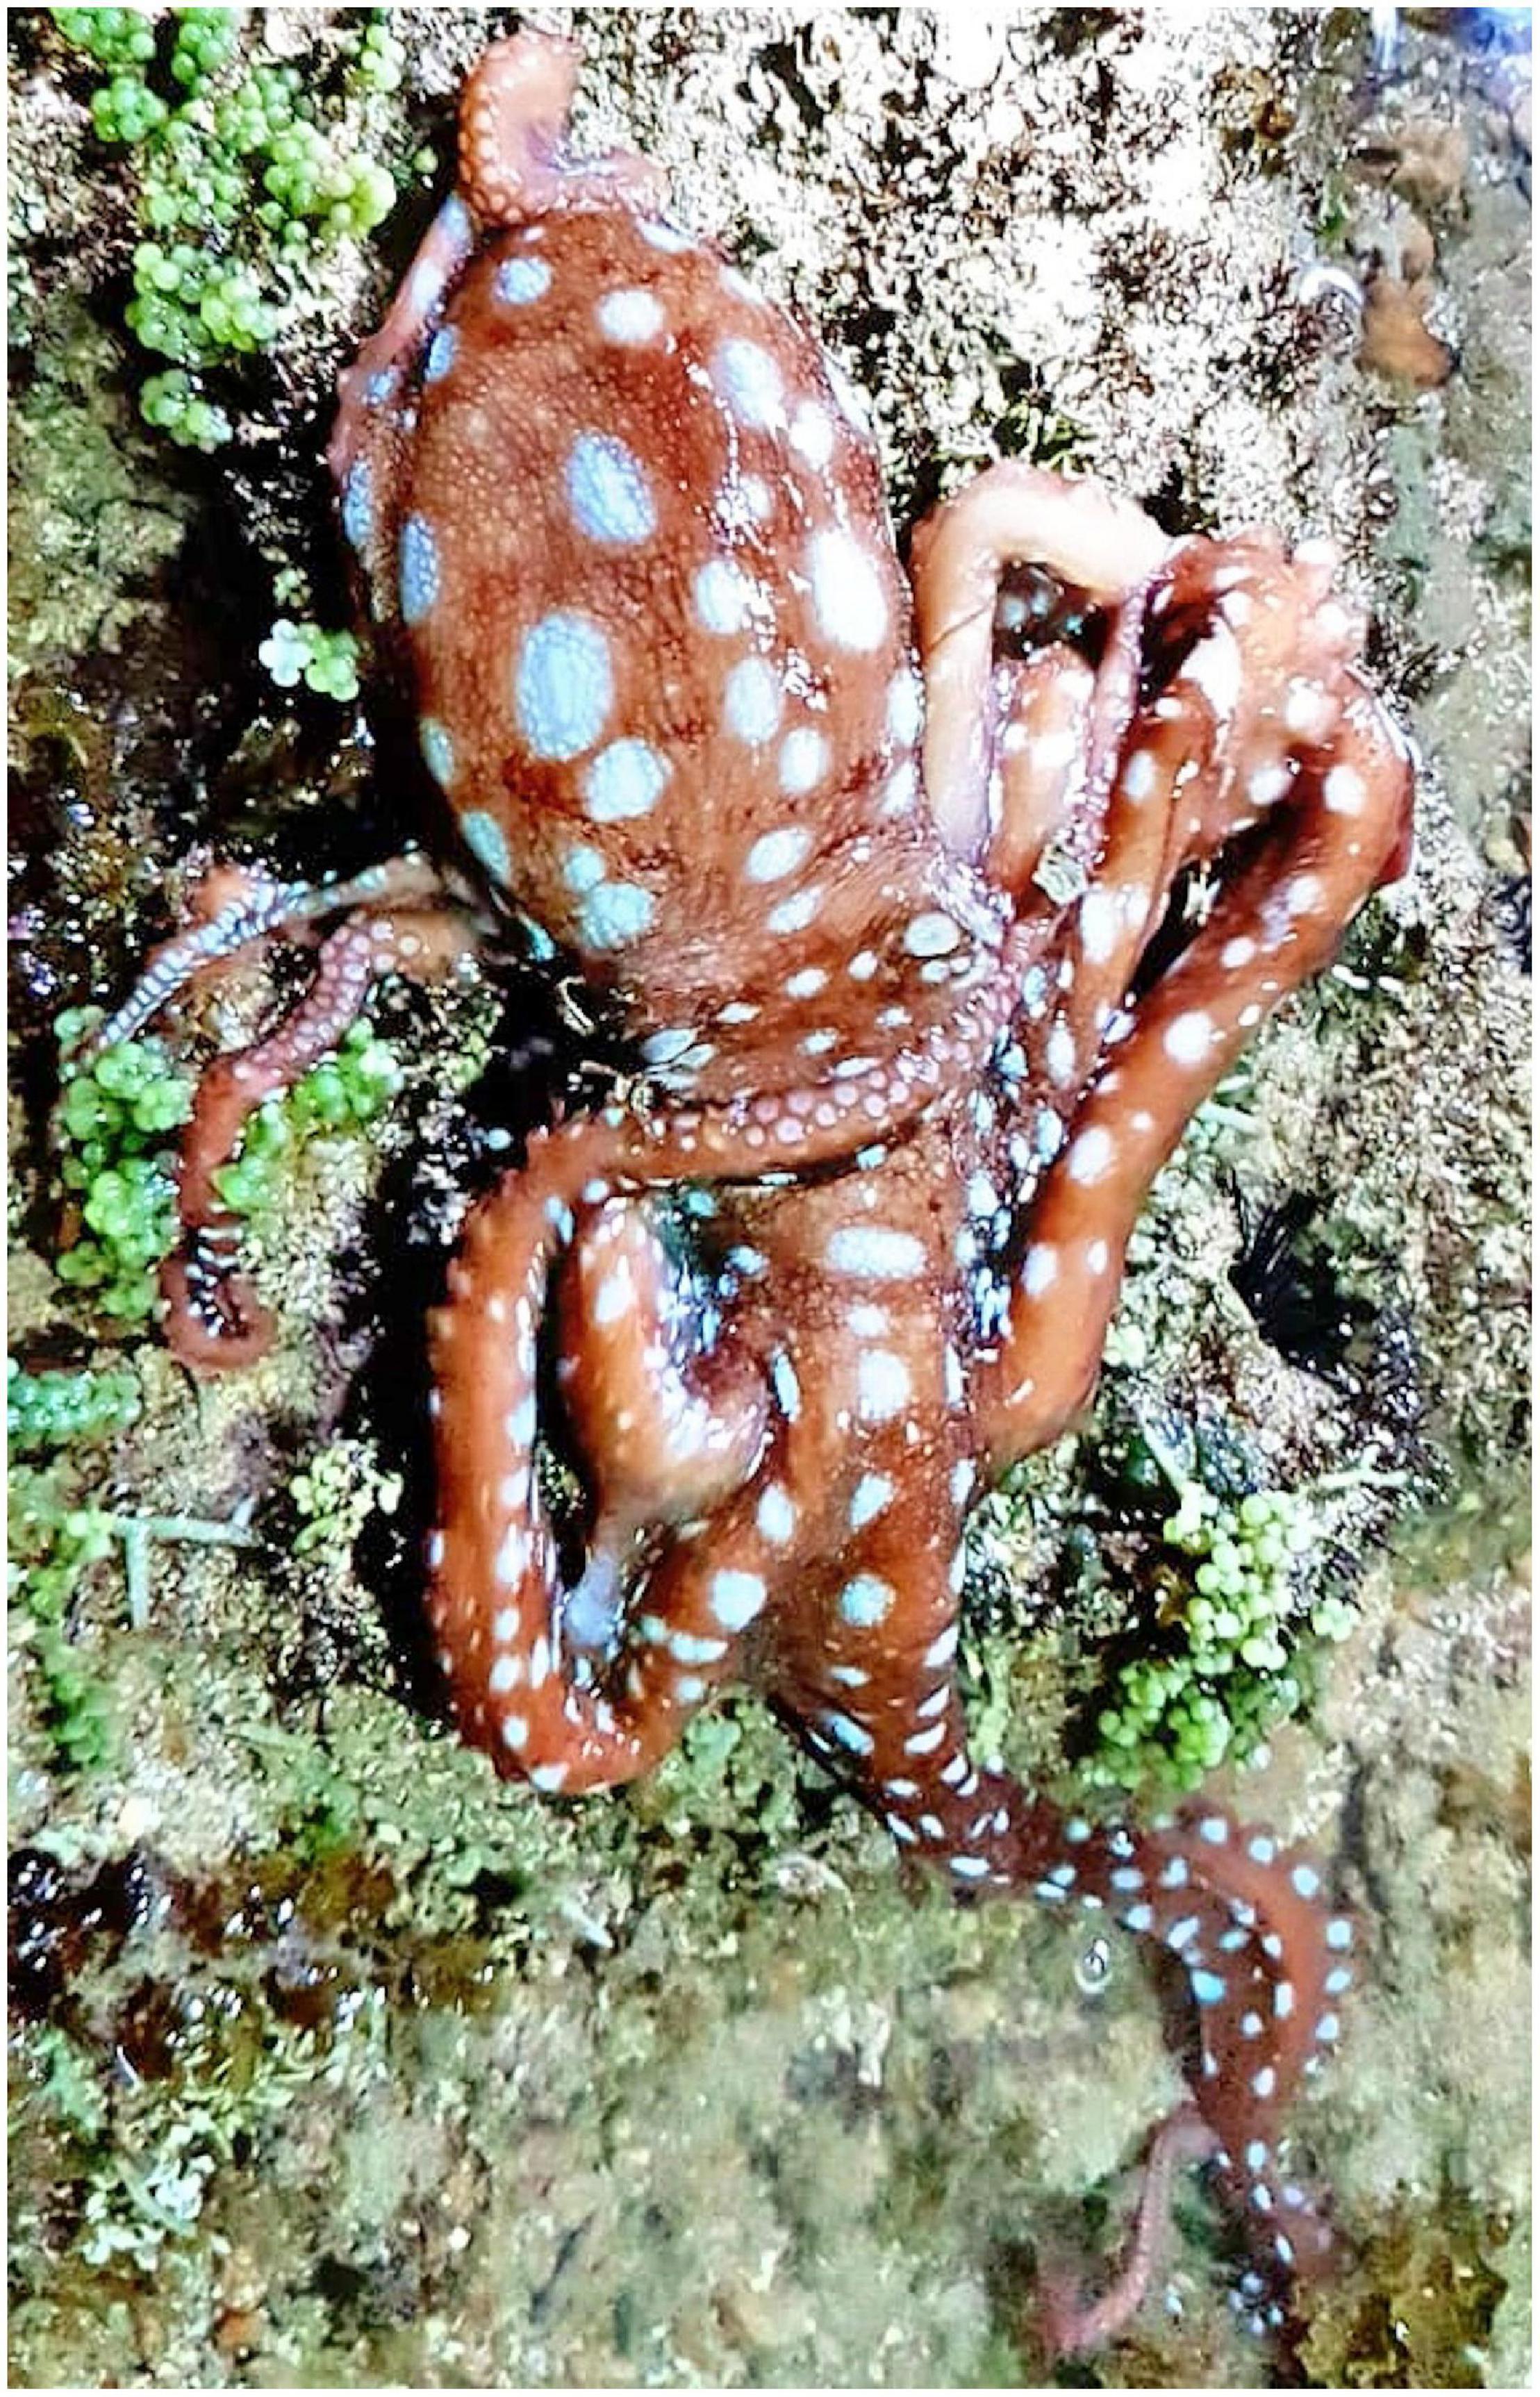 Frontiers  Octopus Fishing and New Information on Ecology and Fishing of  the Shallow-Water Octopus Callistoctopus furvus (Gould, 1852) Based on the  Local Ecological Knowledge of Octopus Fishers in the Marine Ecoregions